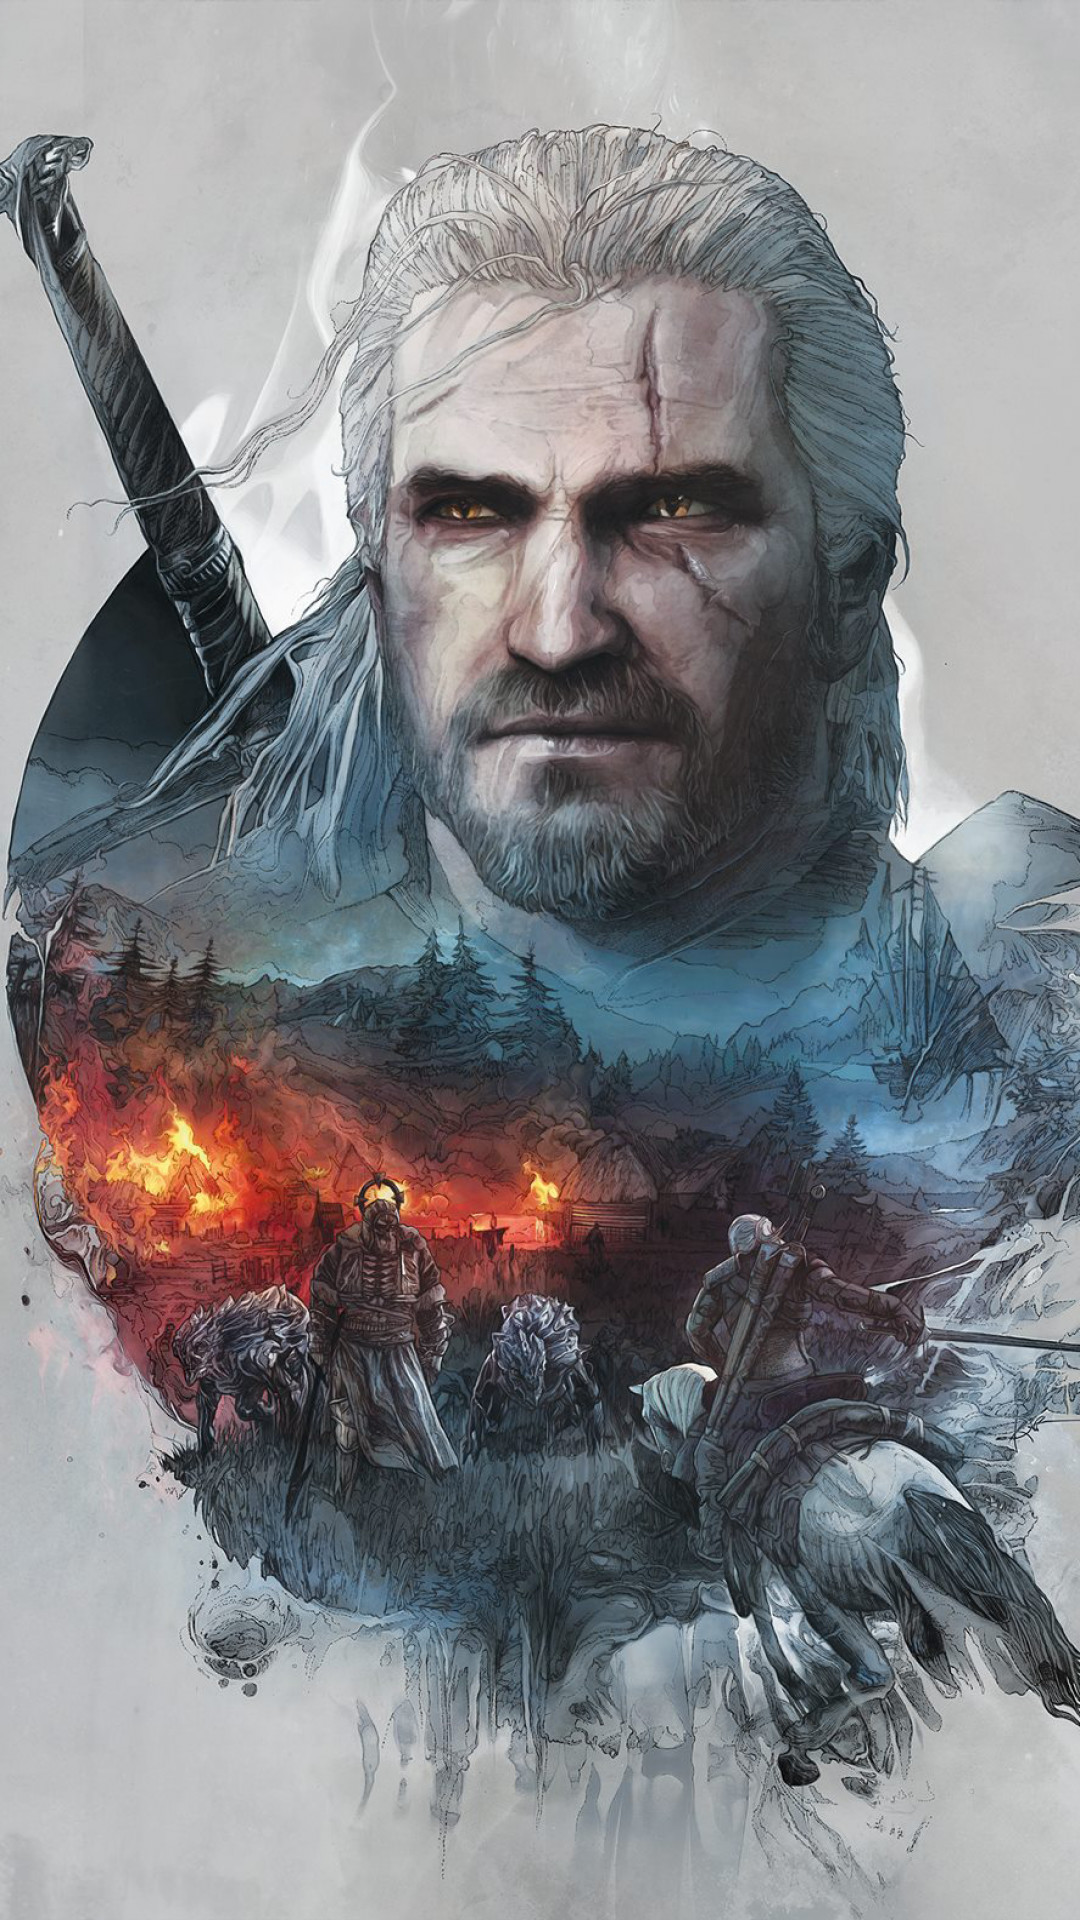 the witcher 3 iphone wallpaper,illustration,movie,fictional character,cg artwork,art